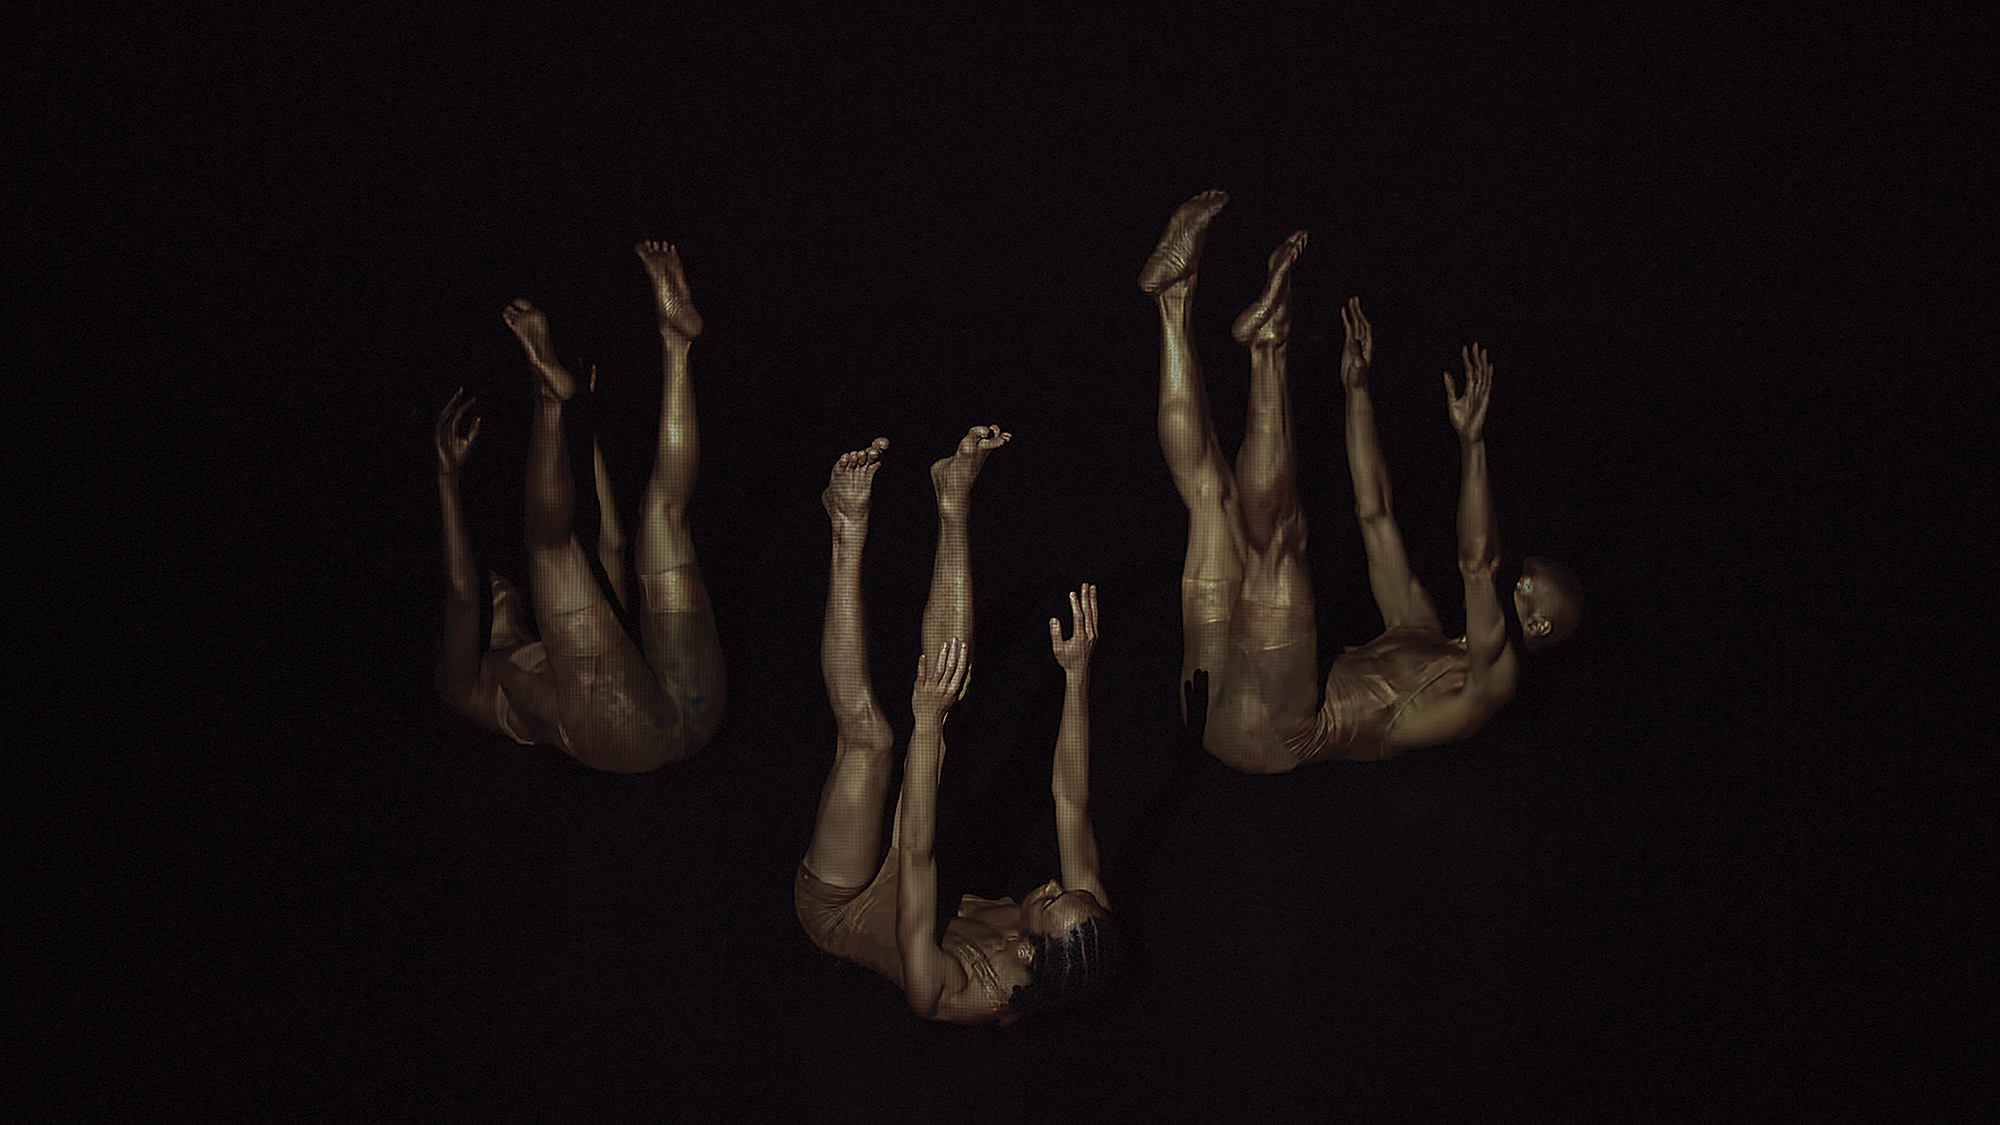 In a dimly lit scene, three dancers are on their back with their limbs extended up